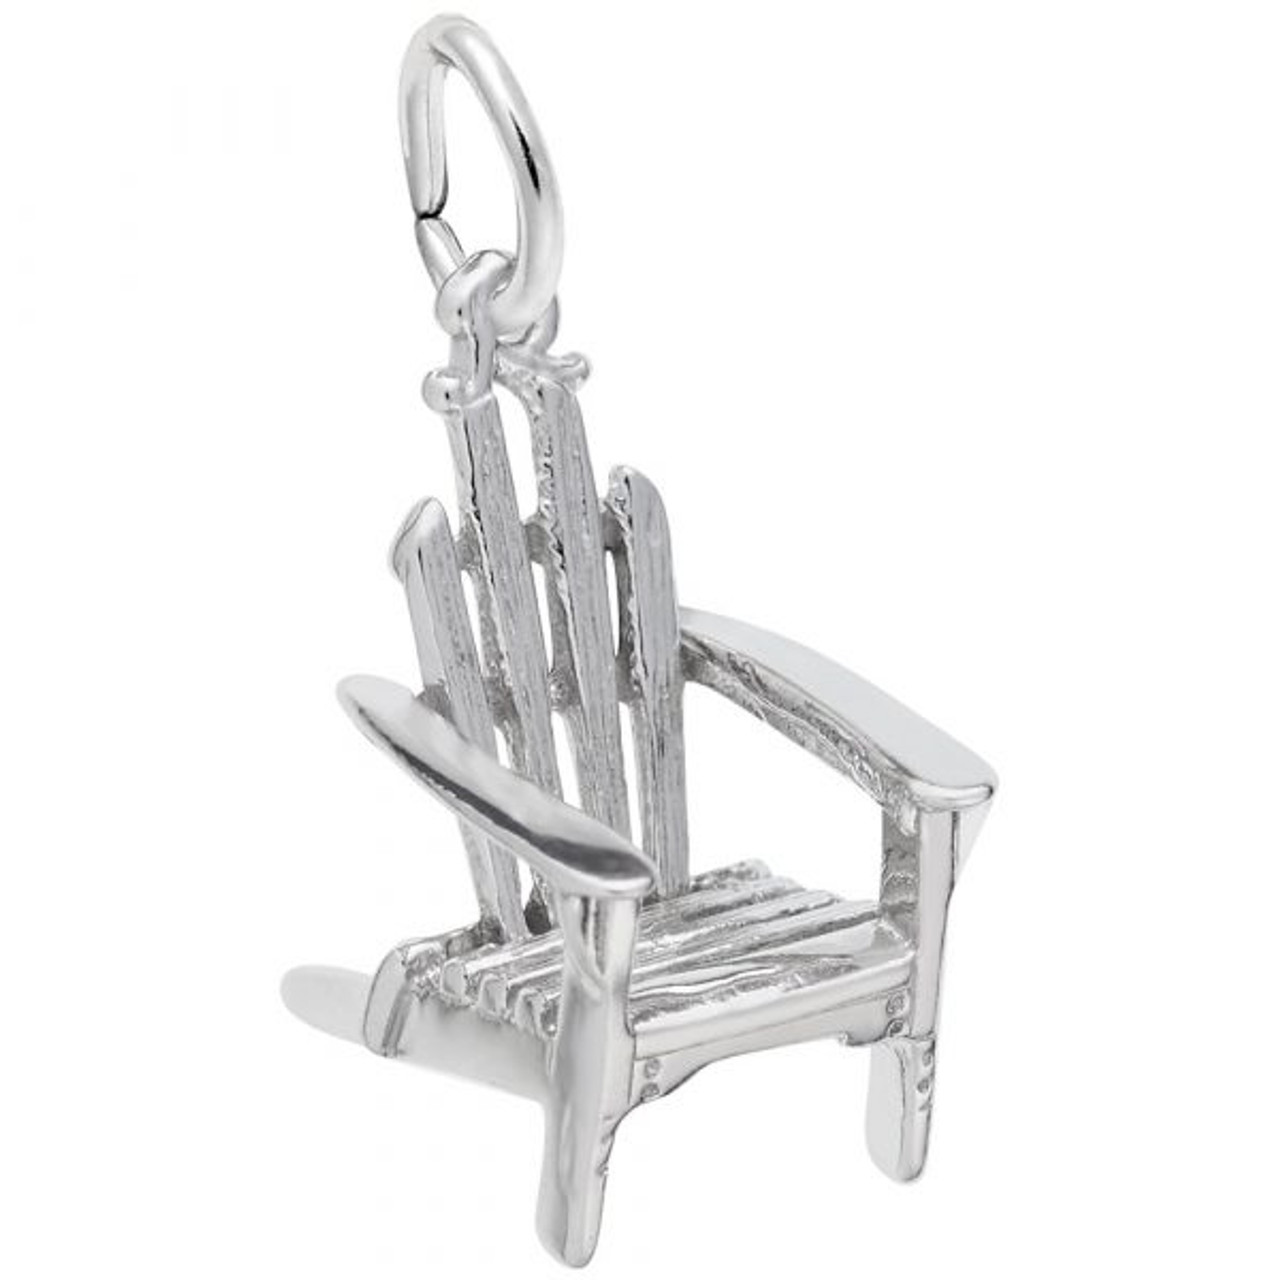 Adirondack Chair Silver Charm - Sterling Silver and 14k White Gold